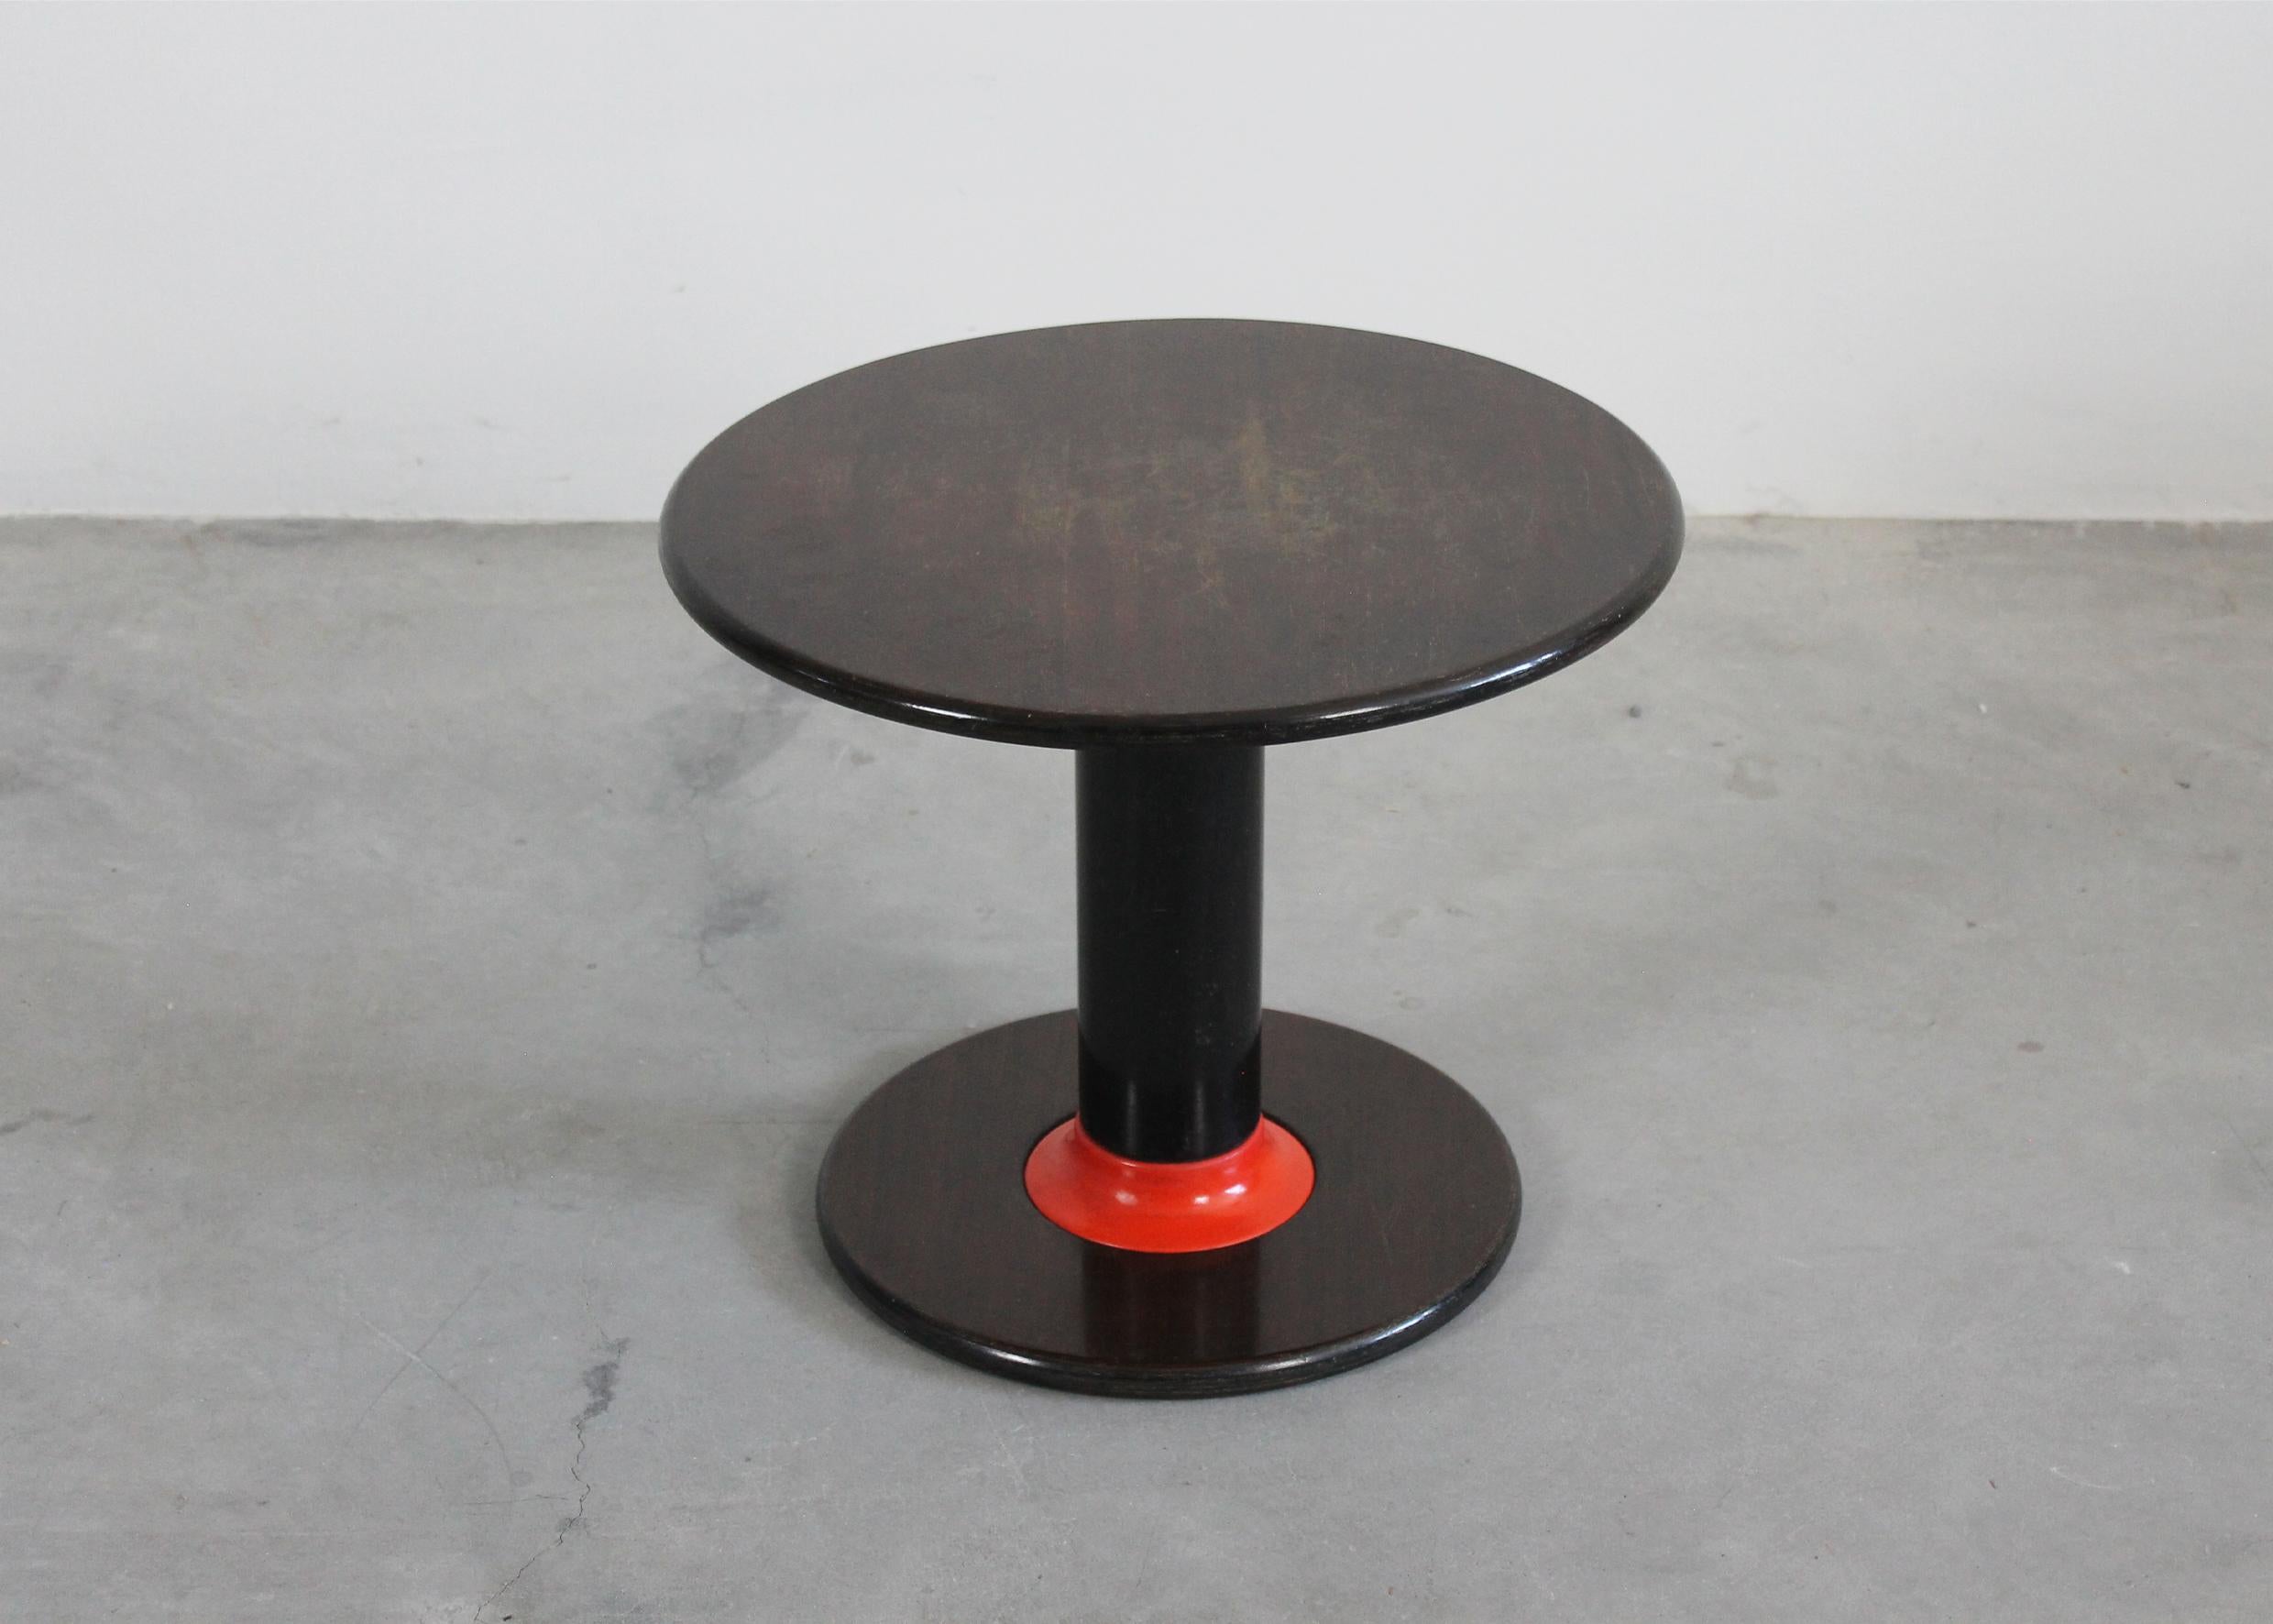 Italian Ettore Sottsass Rocchetto Round Side Table in Walnut Wood by Poltronova 1964  For Sale